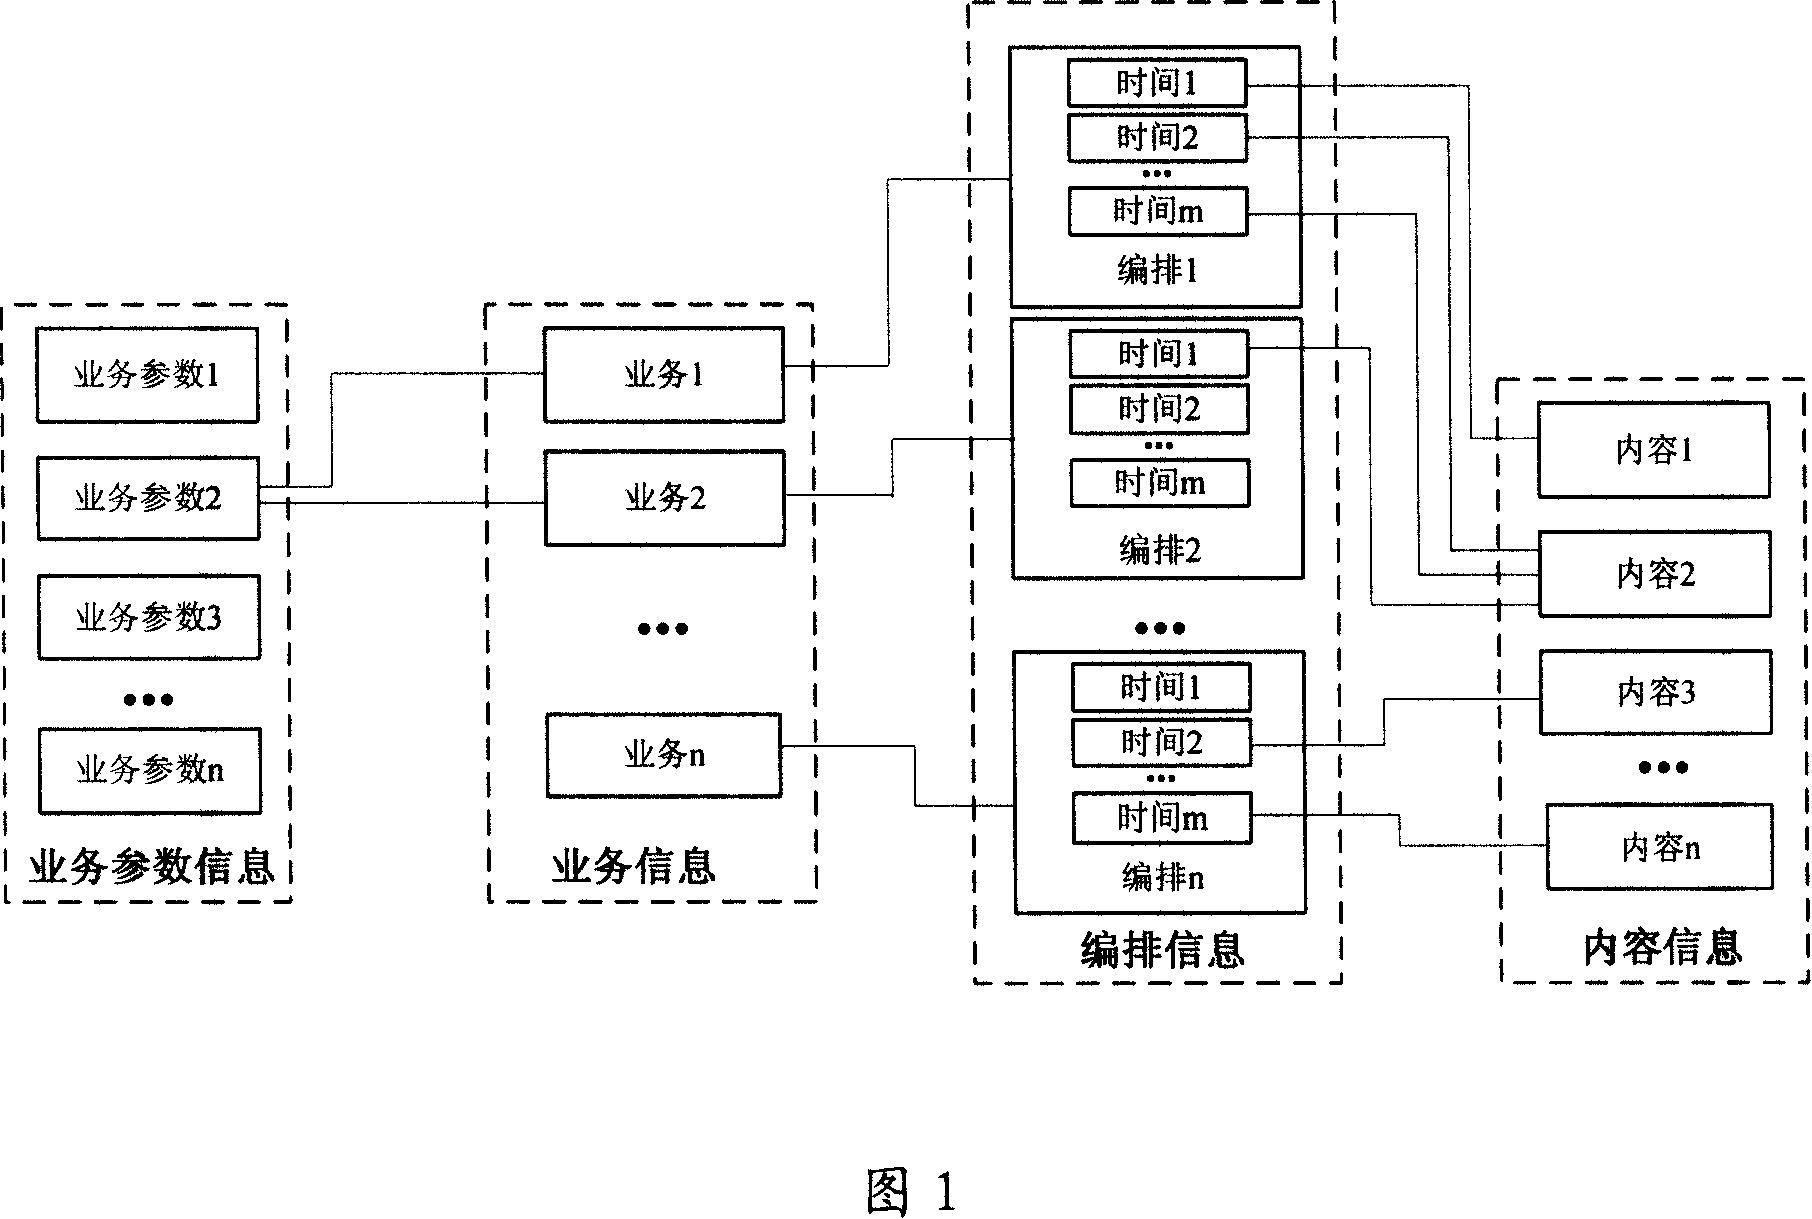 Transmission method for data information of electronic service directory